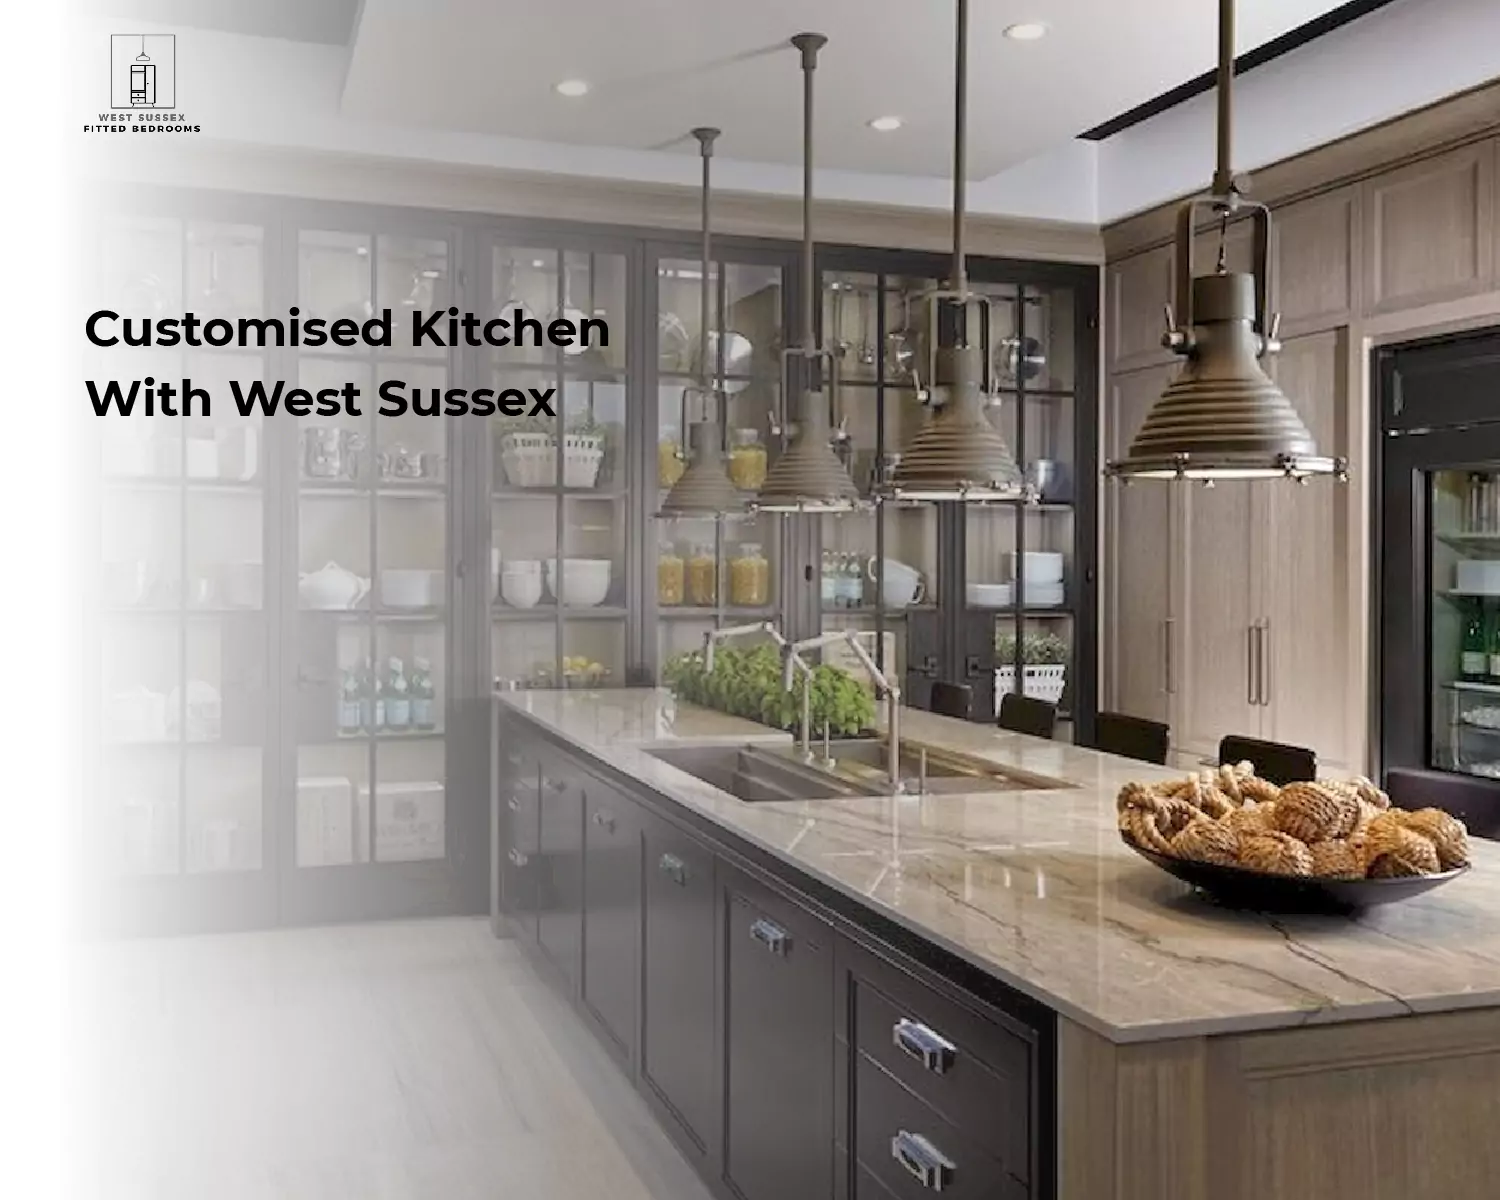 Customised Kitchen With West Sussex